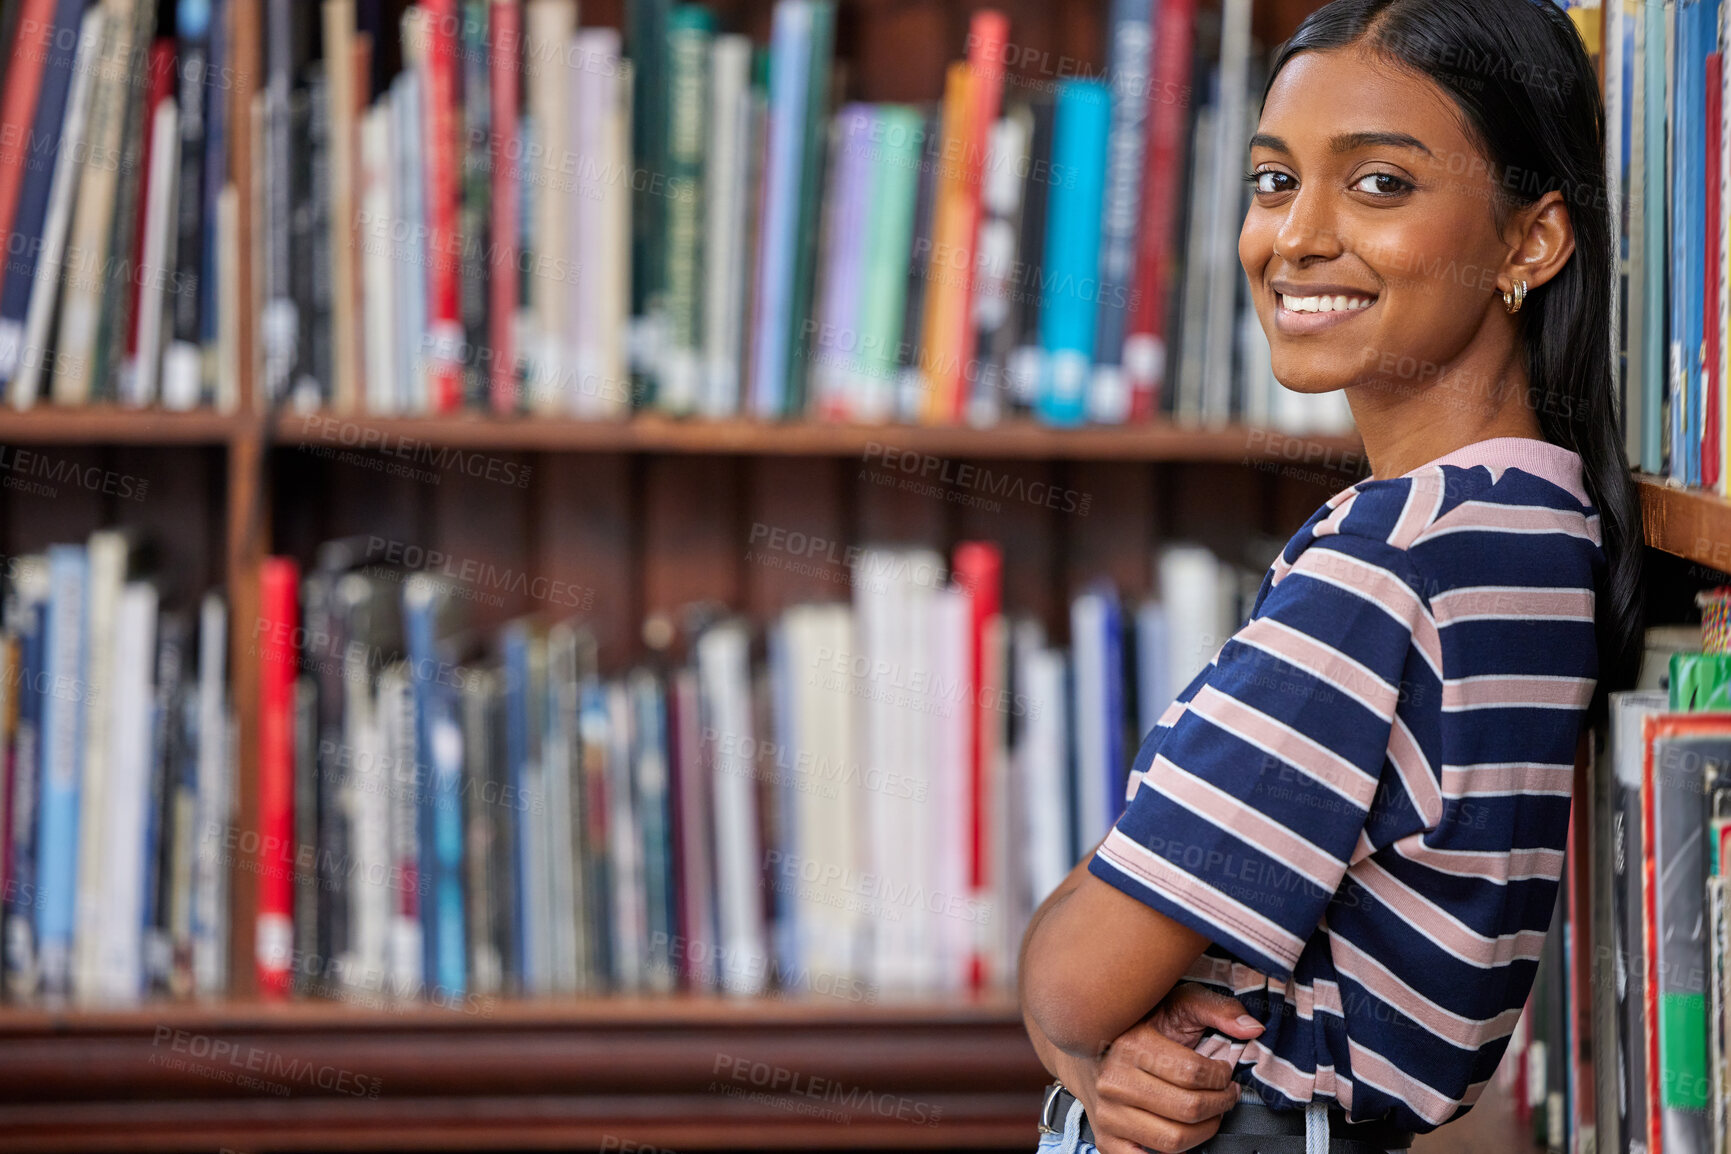 Buy stock photo Shot of a female standing in a library